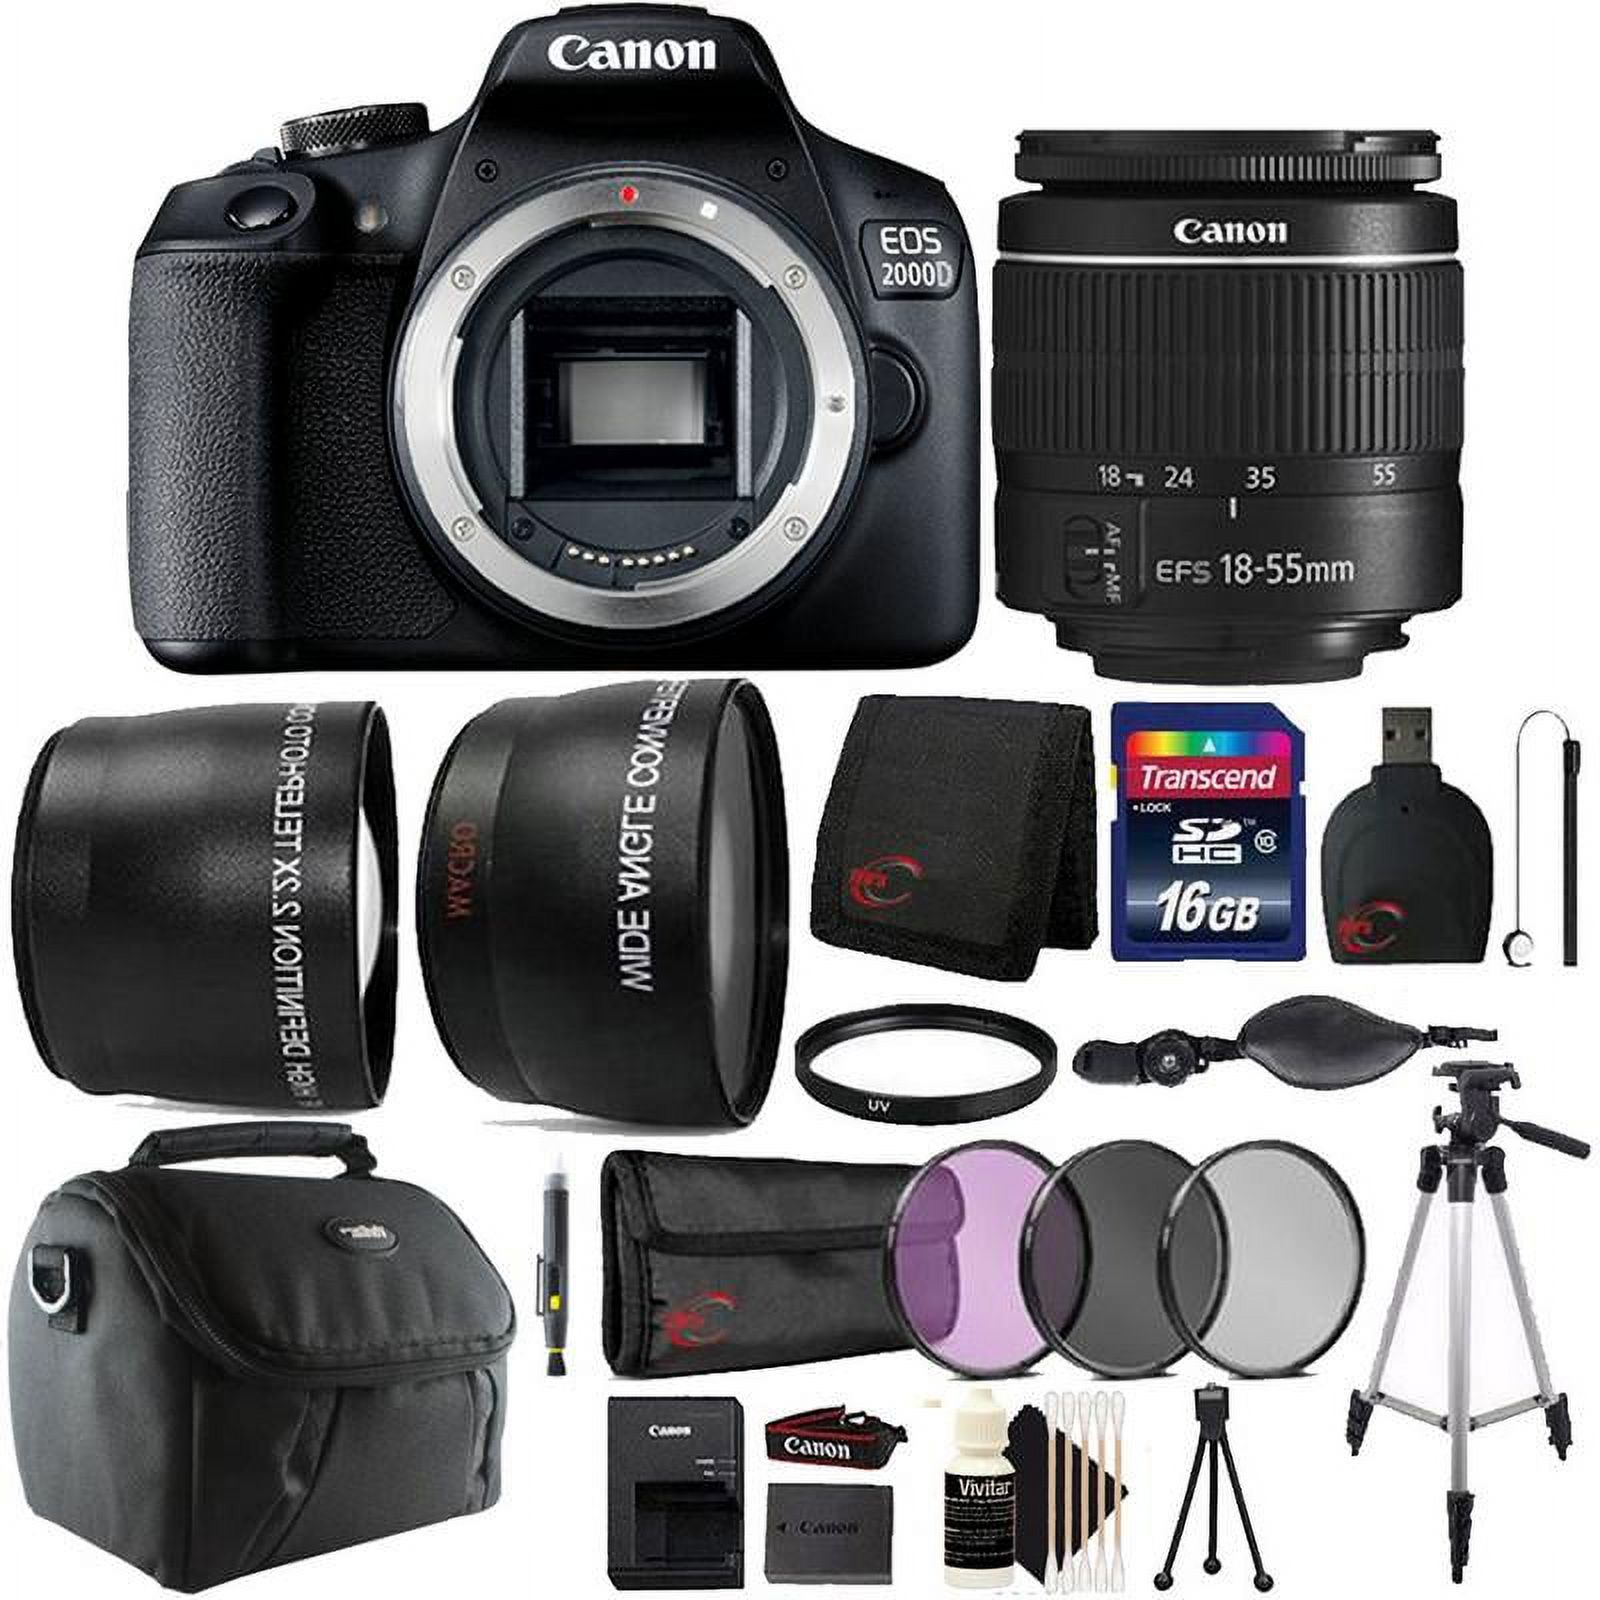 Canon EOS 2000D / Rebel T7 24.1MP Wi-Fi Digital SLR Camera with 18-55mm Lens and 16GB Accessory Bundle - image 1 of 11